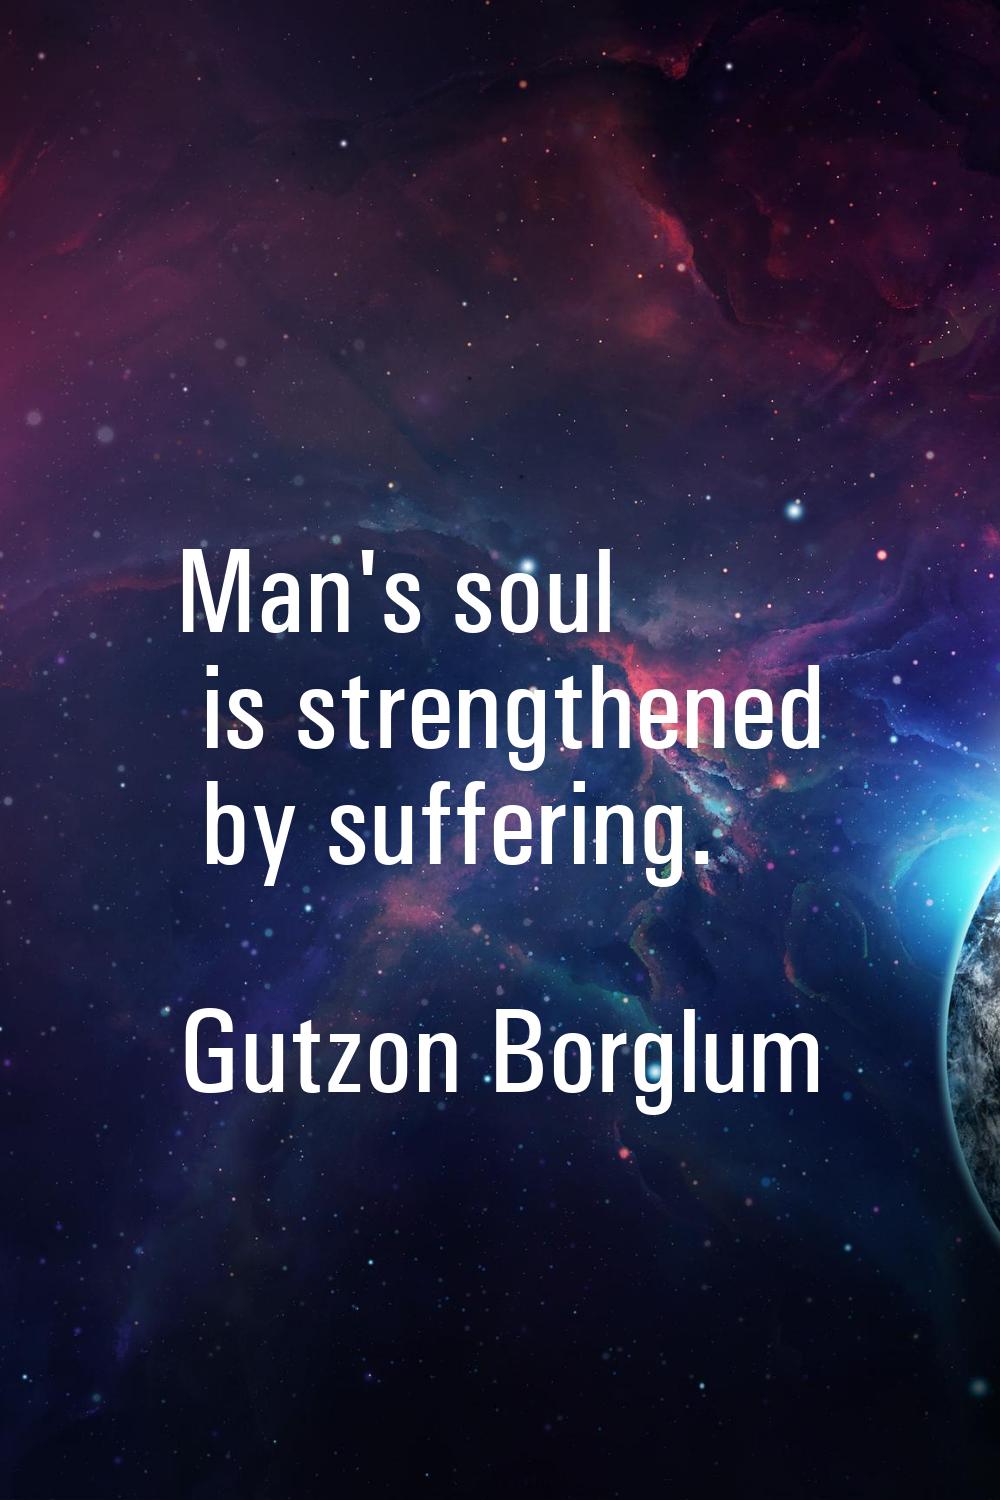 Man's soul is strengthened by suffering.